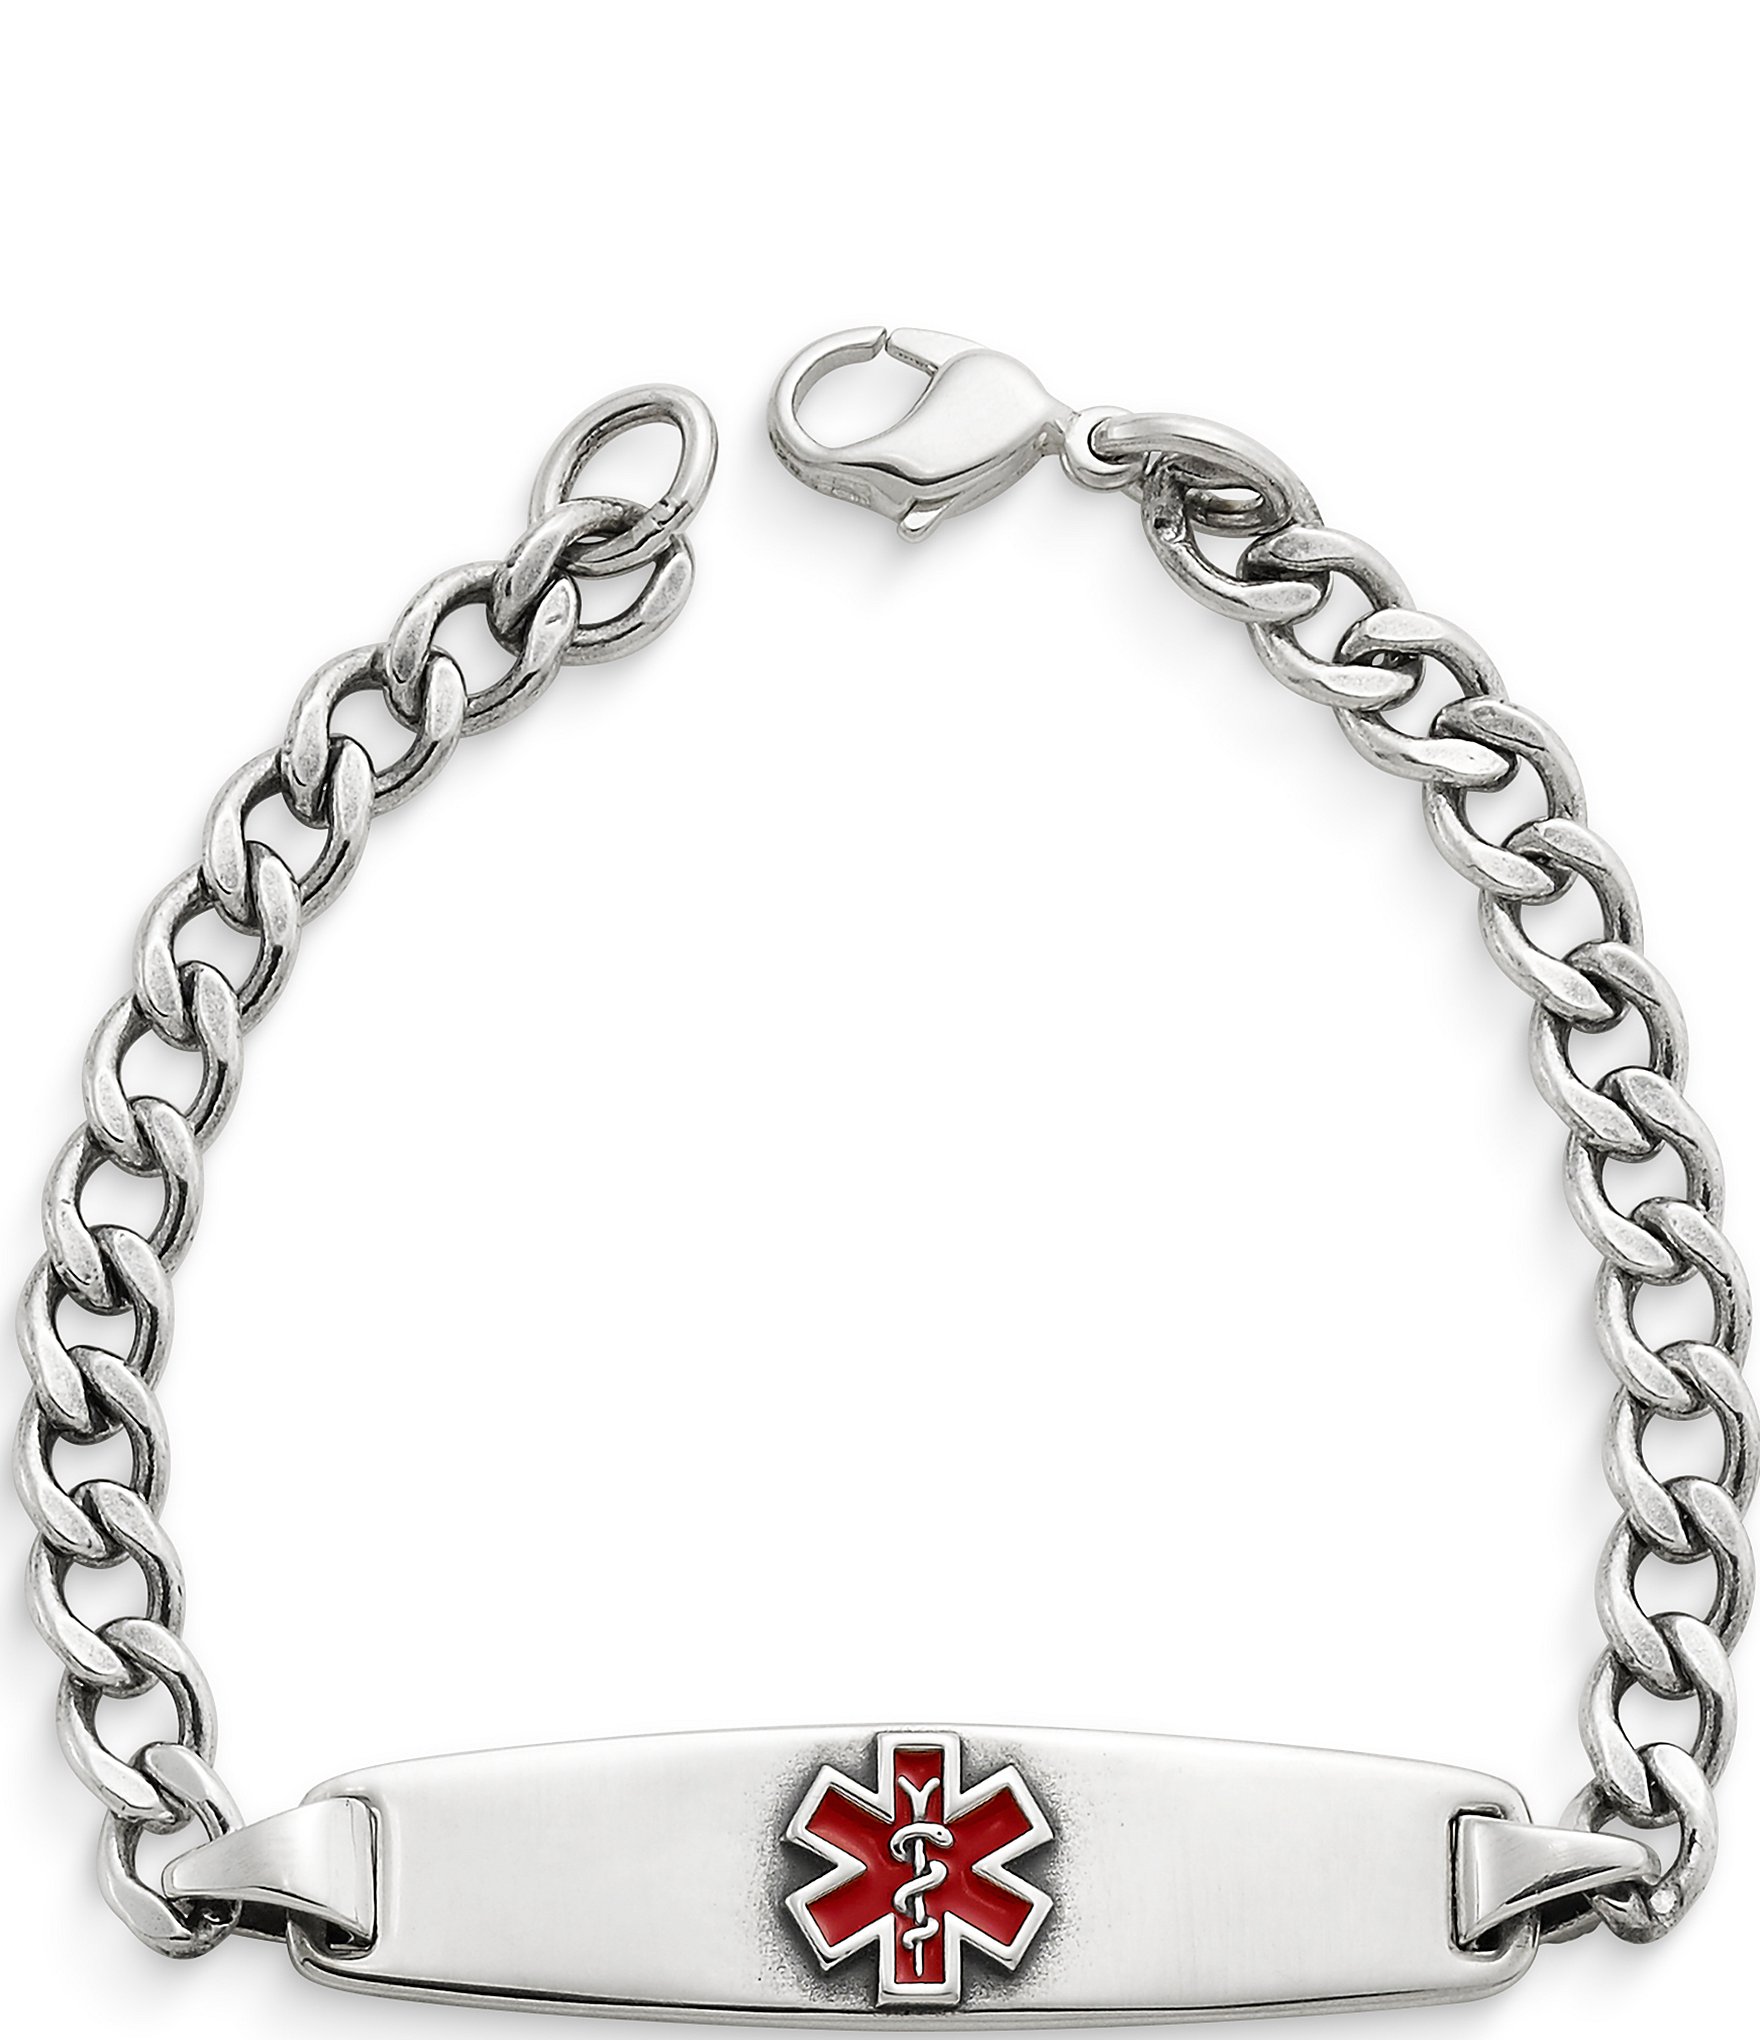 James Avery Hold Fast Leather Bracelet - 8 in.